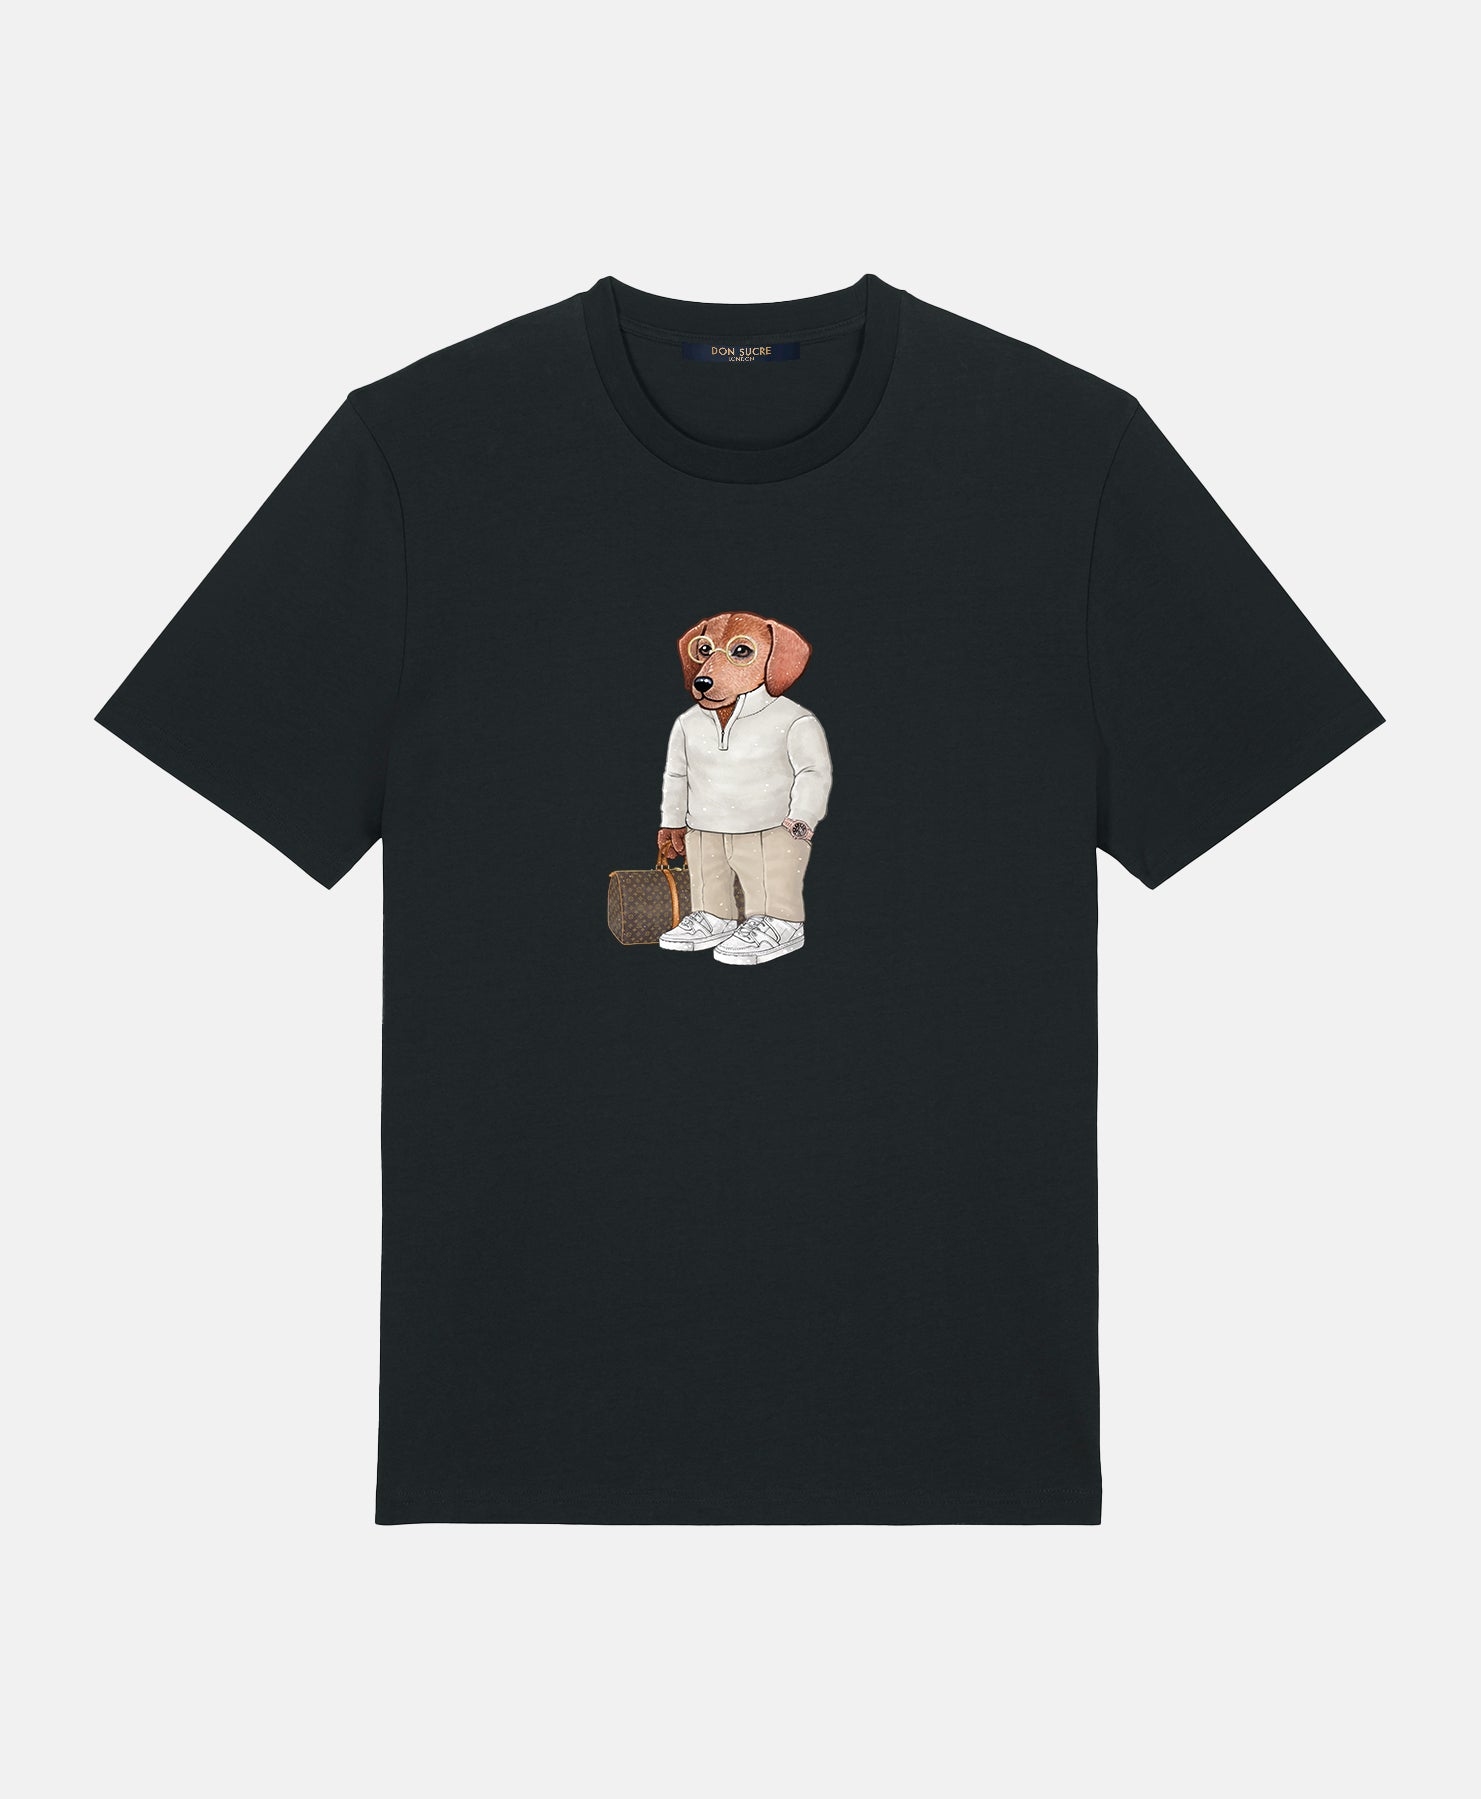 Doxie "Top Dog" T-shirt